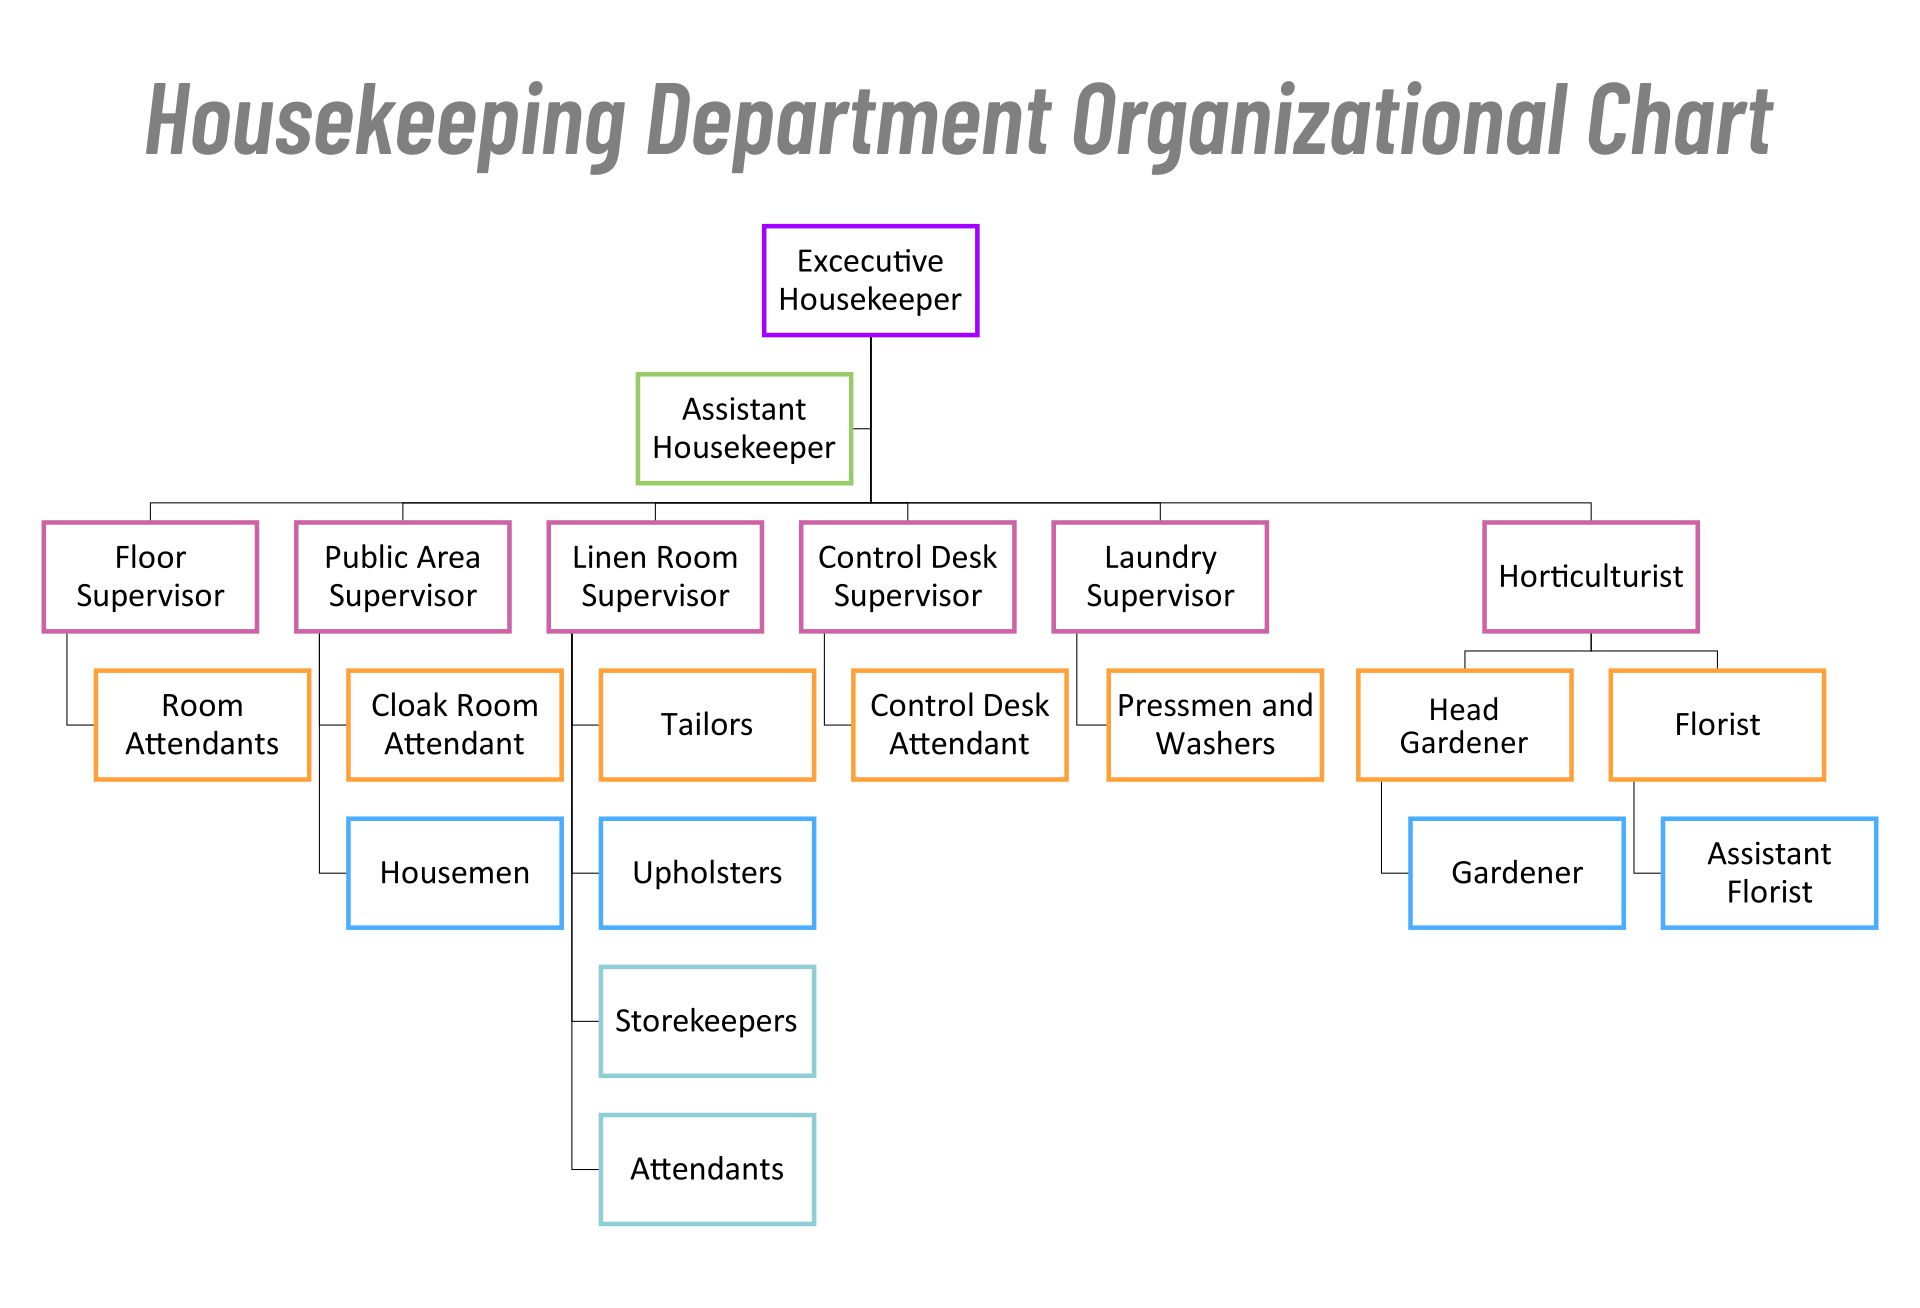 Housekeeping Department Organizational Chart For Hotels